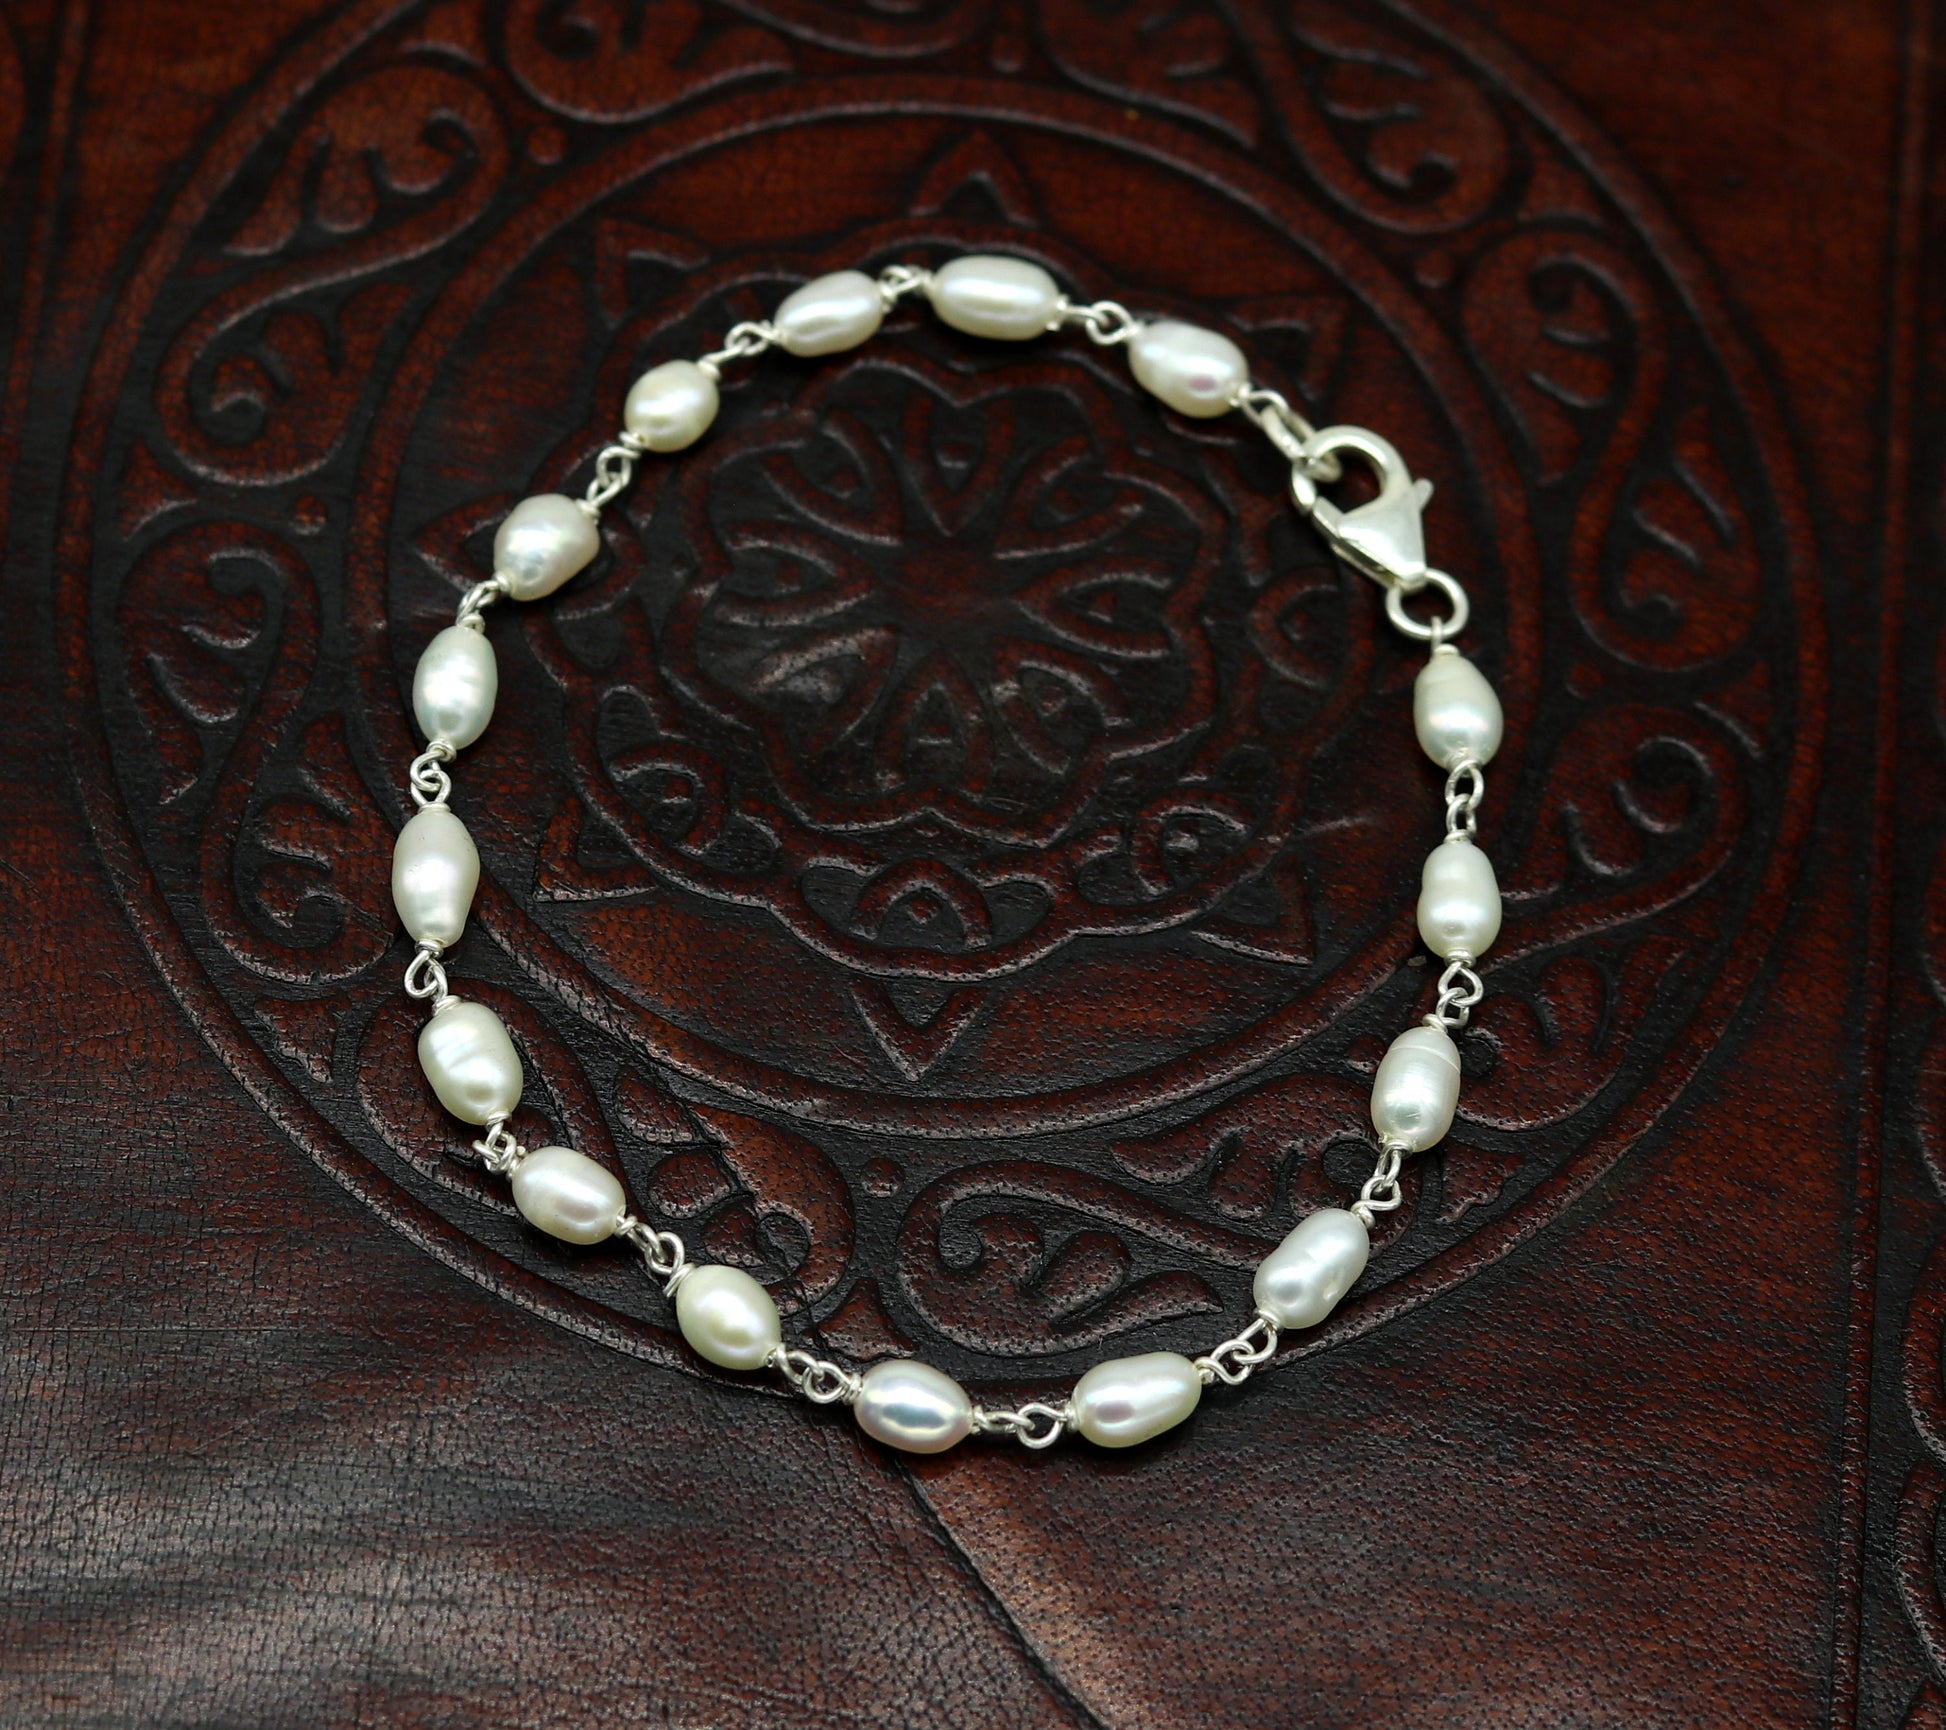 7.5" inches 925 sterling silver handmade customized beaded bracelet, awesome natural pearl unisex bracelet gifting jewelry for girls nsbr190 - TRIBAL ORNAMENTS